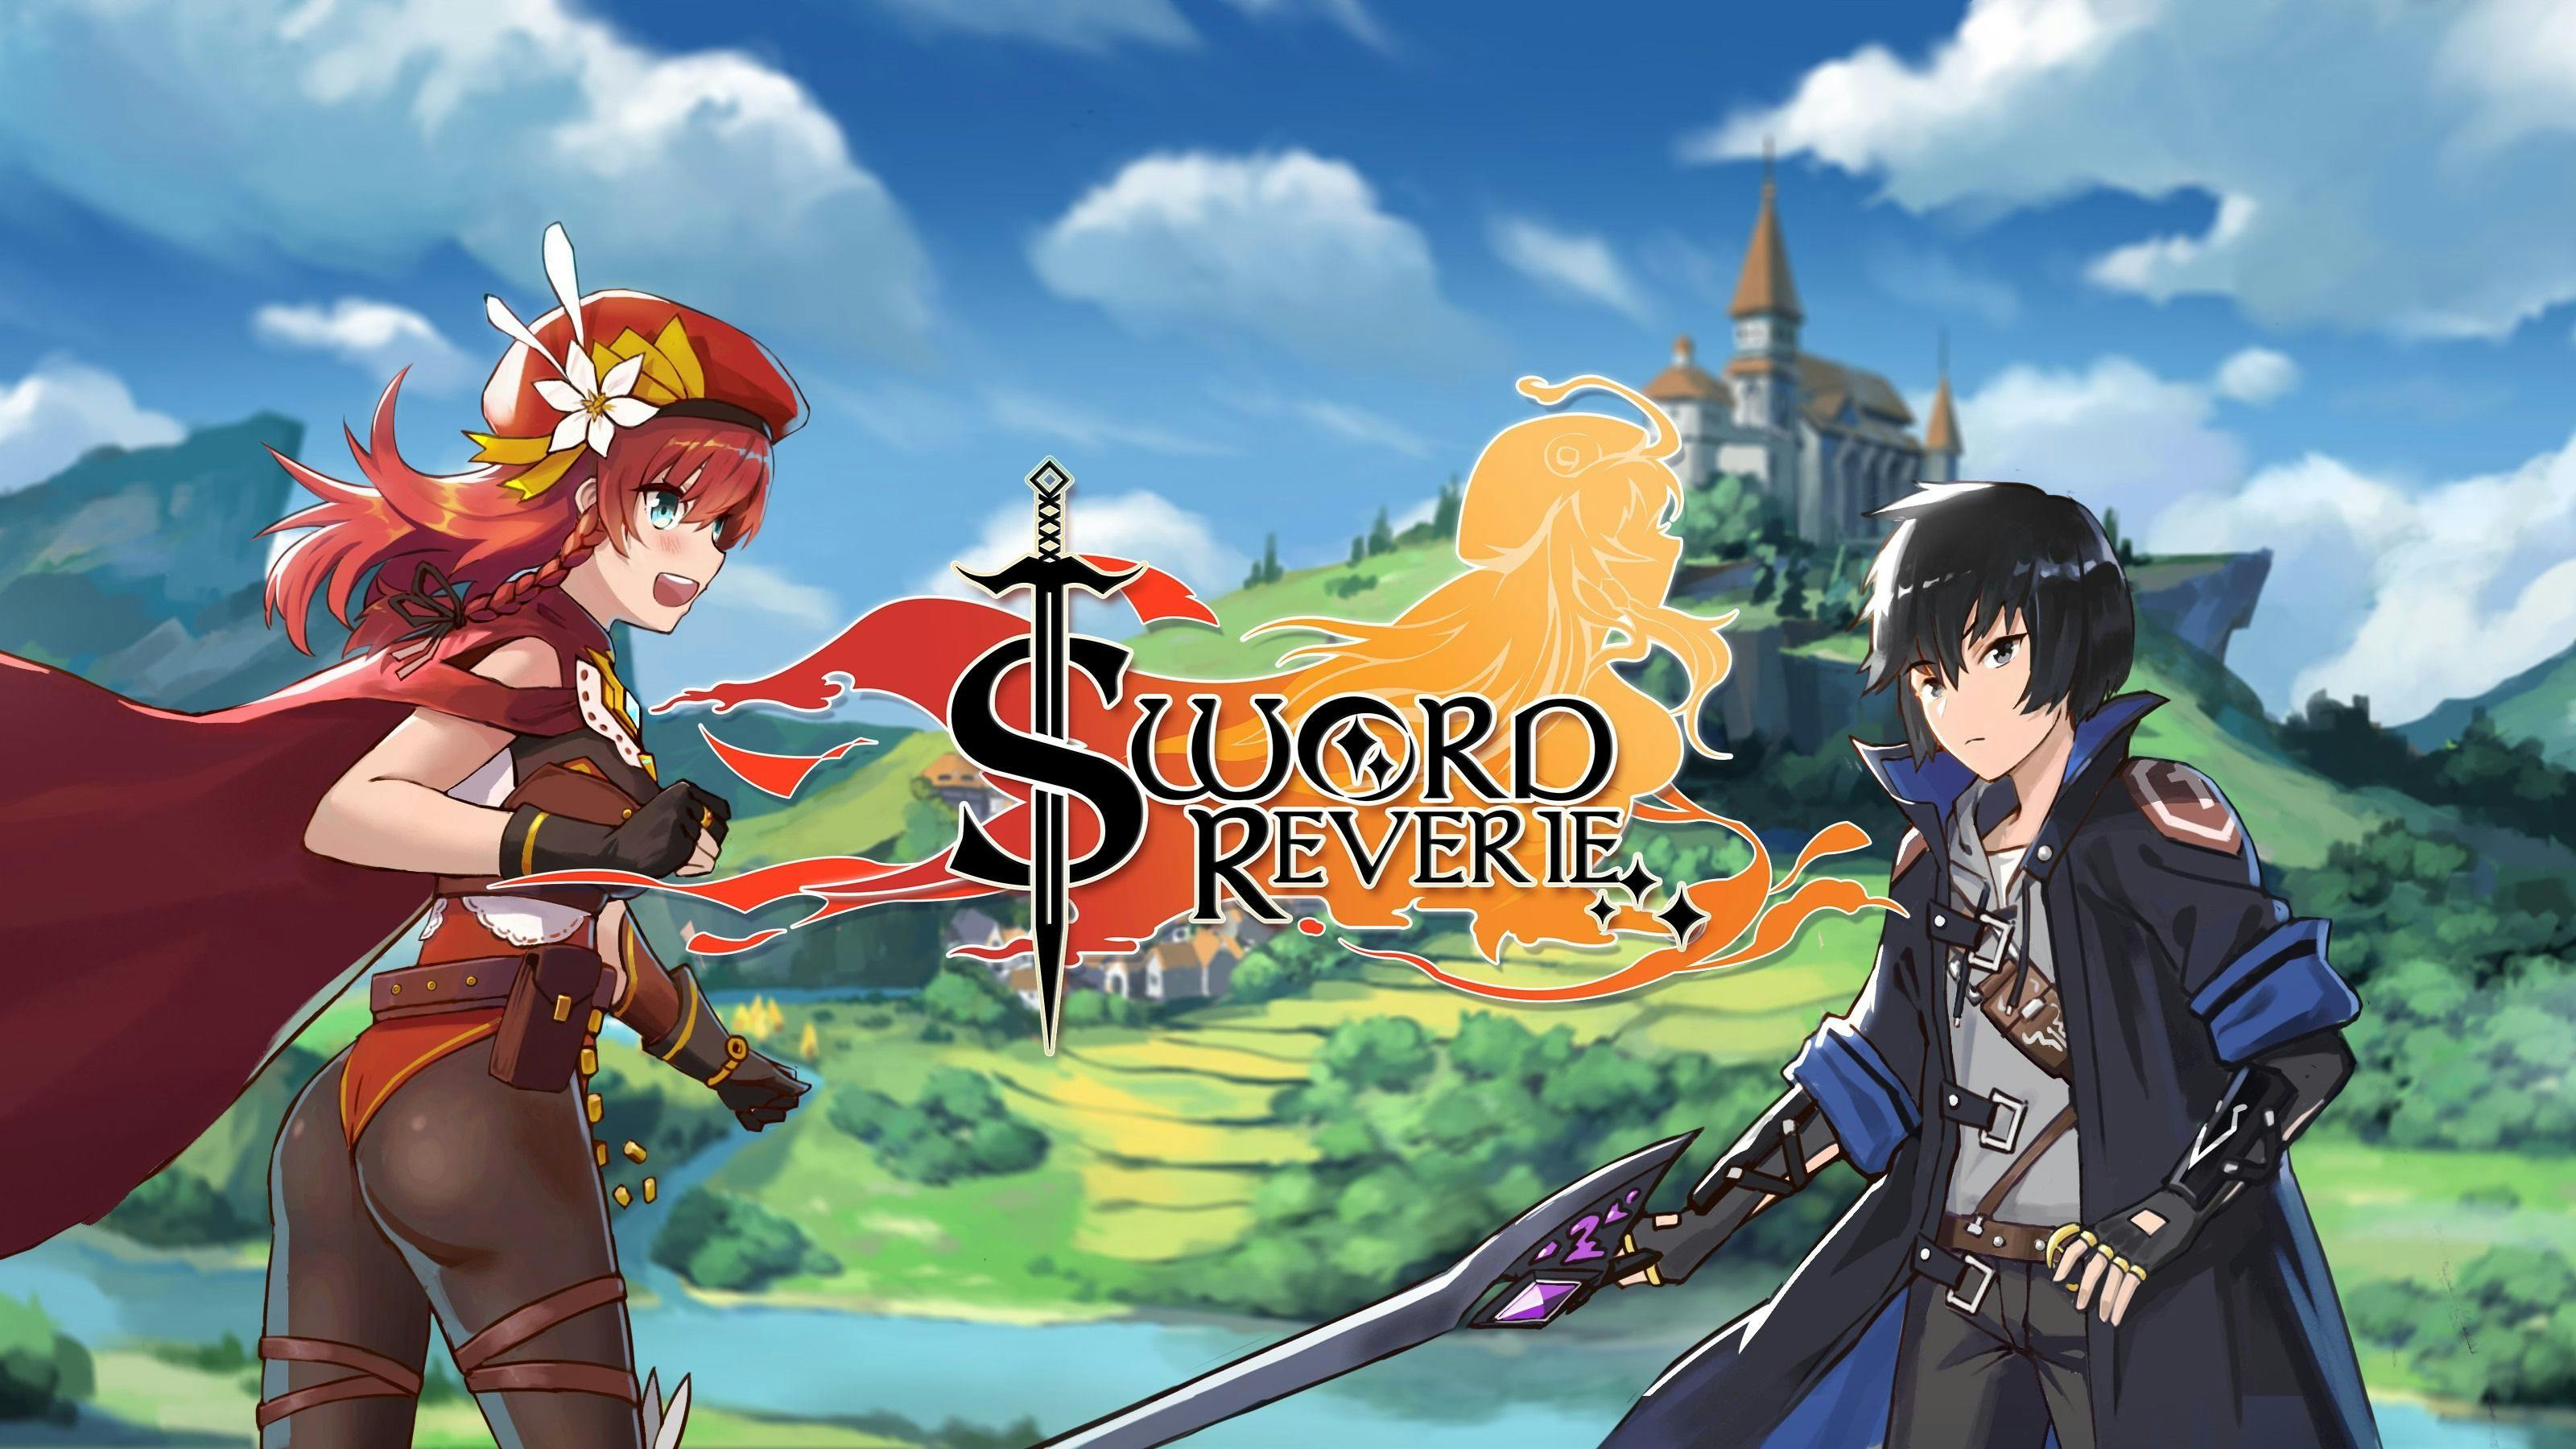 /sword-reverie-is-a-bright-beginning-for-vr-jrpgs-yf16f37ot feature image